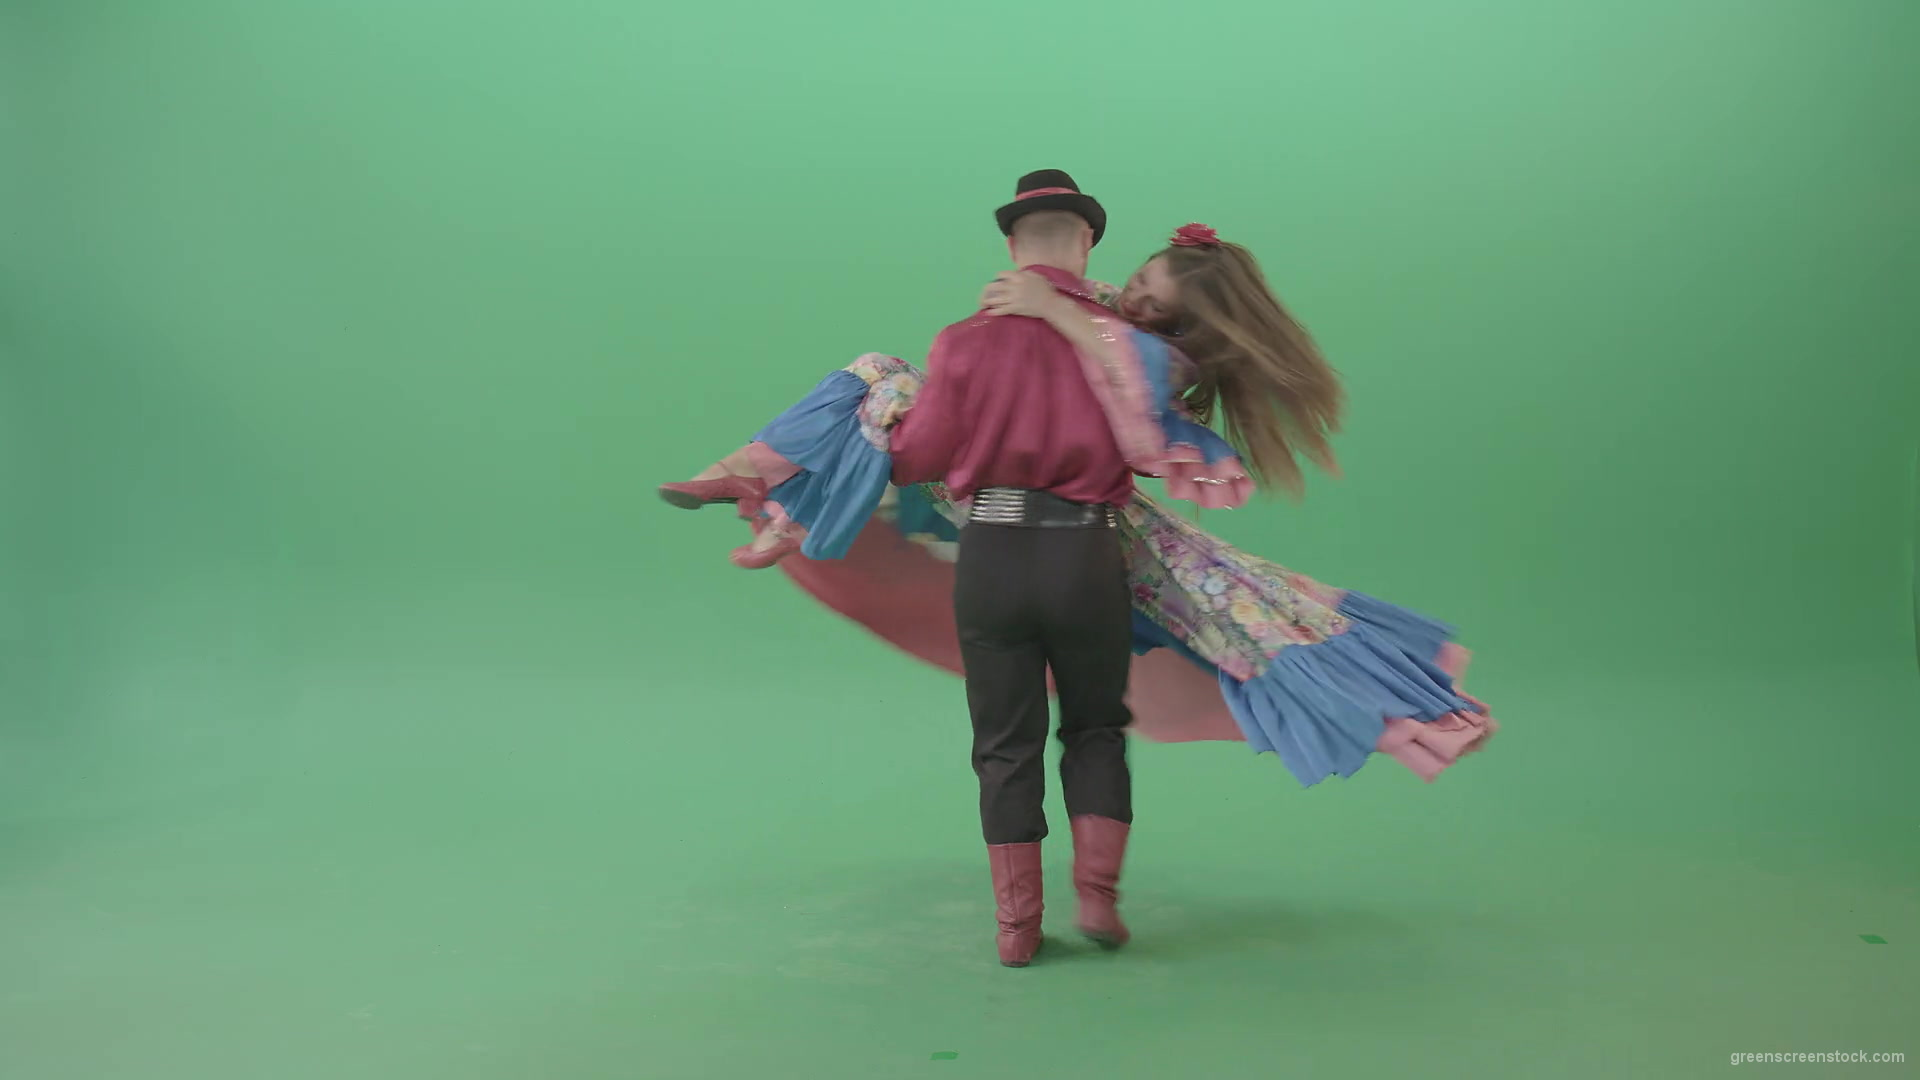 Gypsy-man-and-woman-spinning-dancing-over-green-screen-4K-video-footage-1920_009 Green Screen Stock